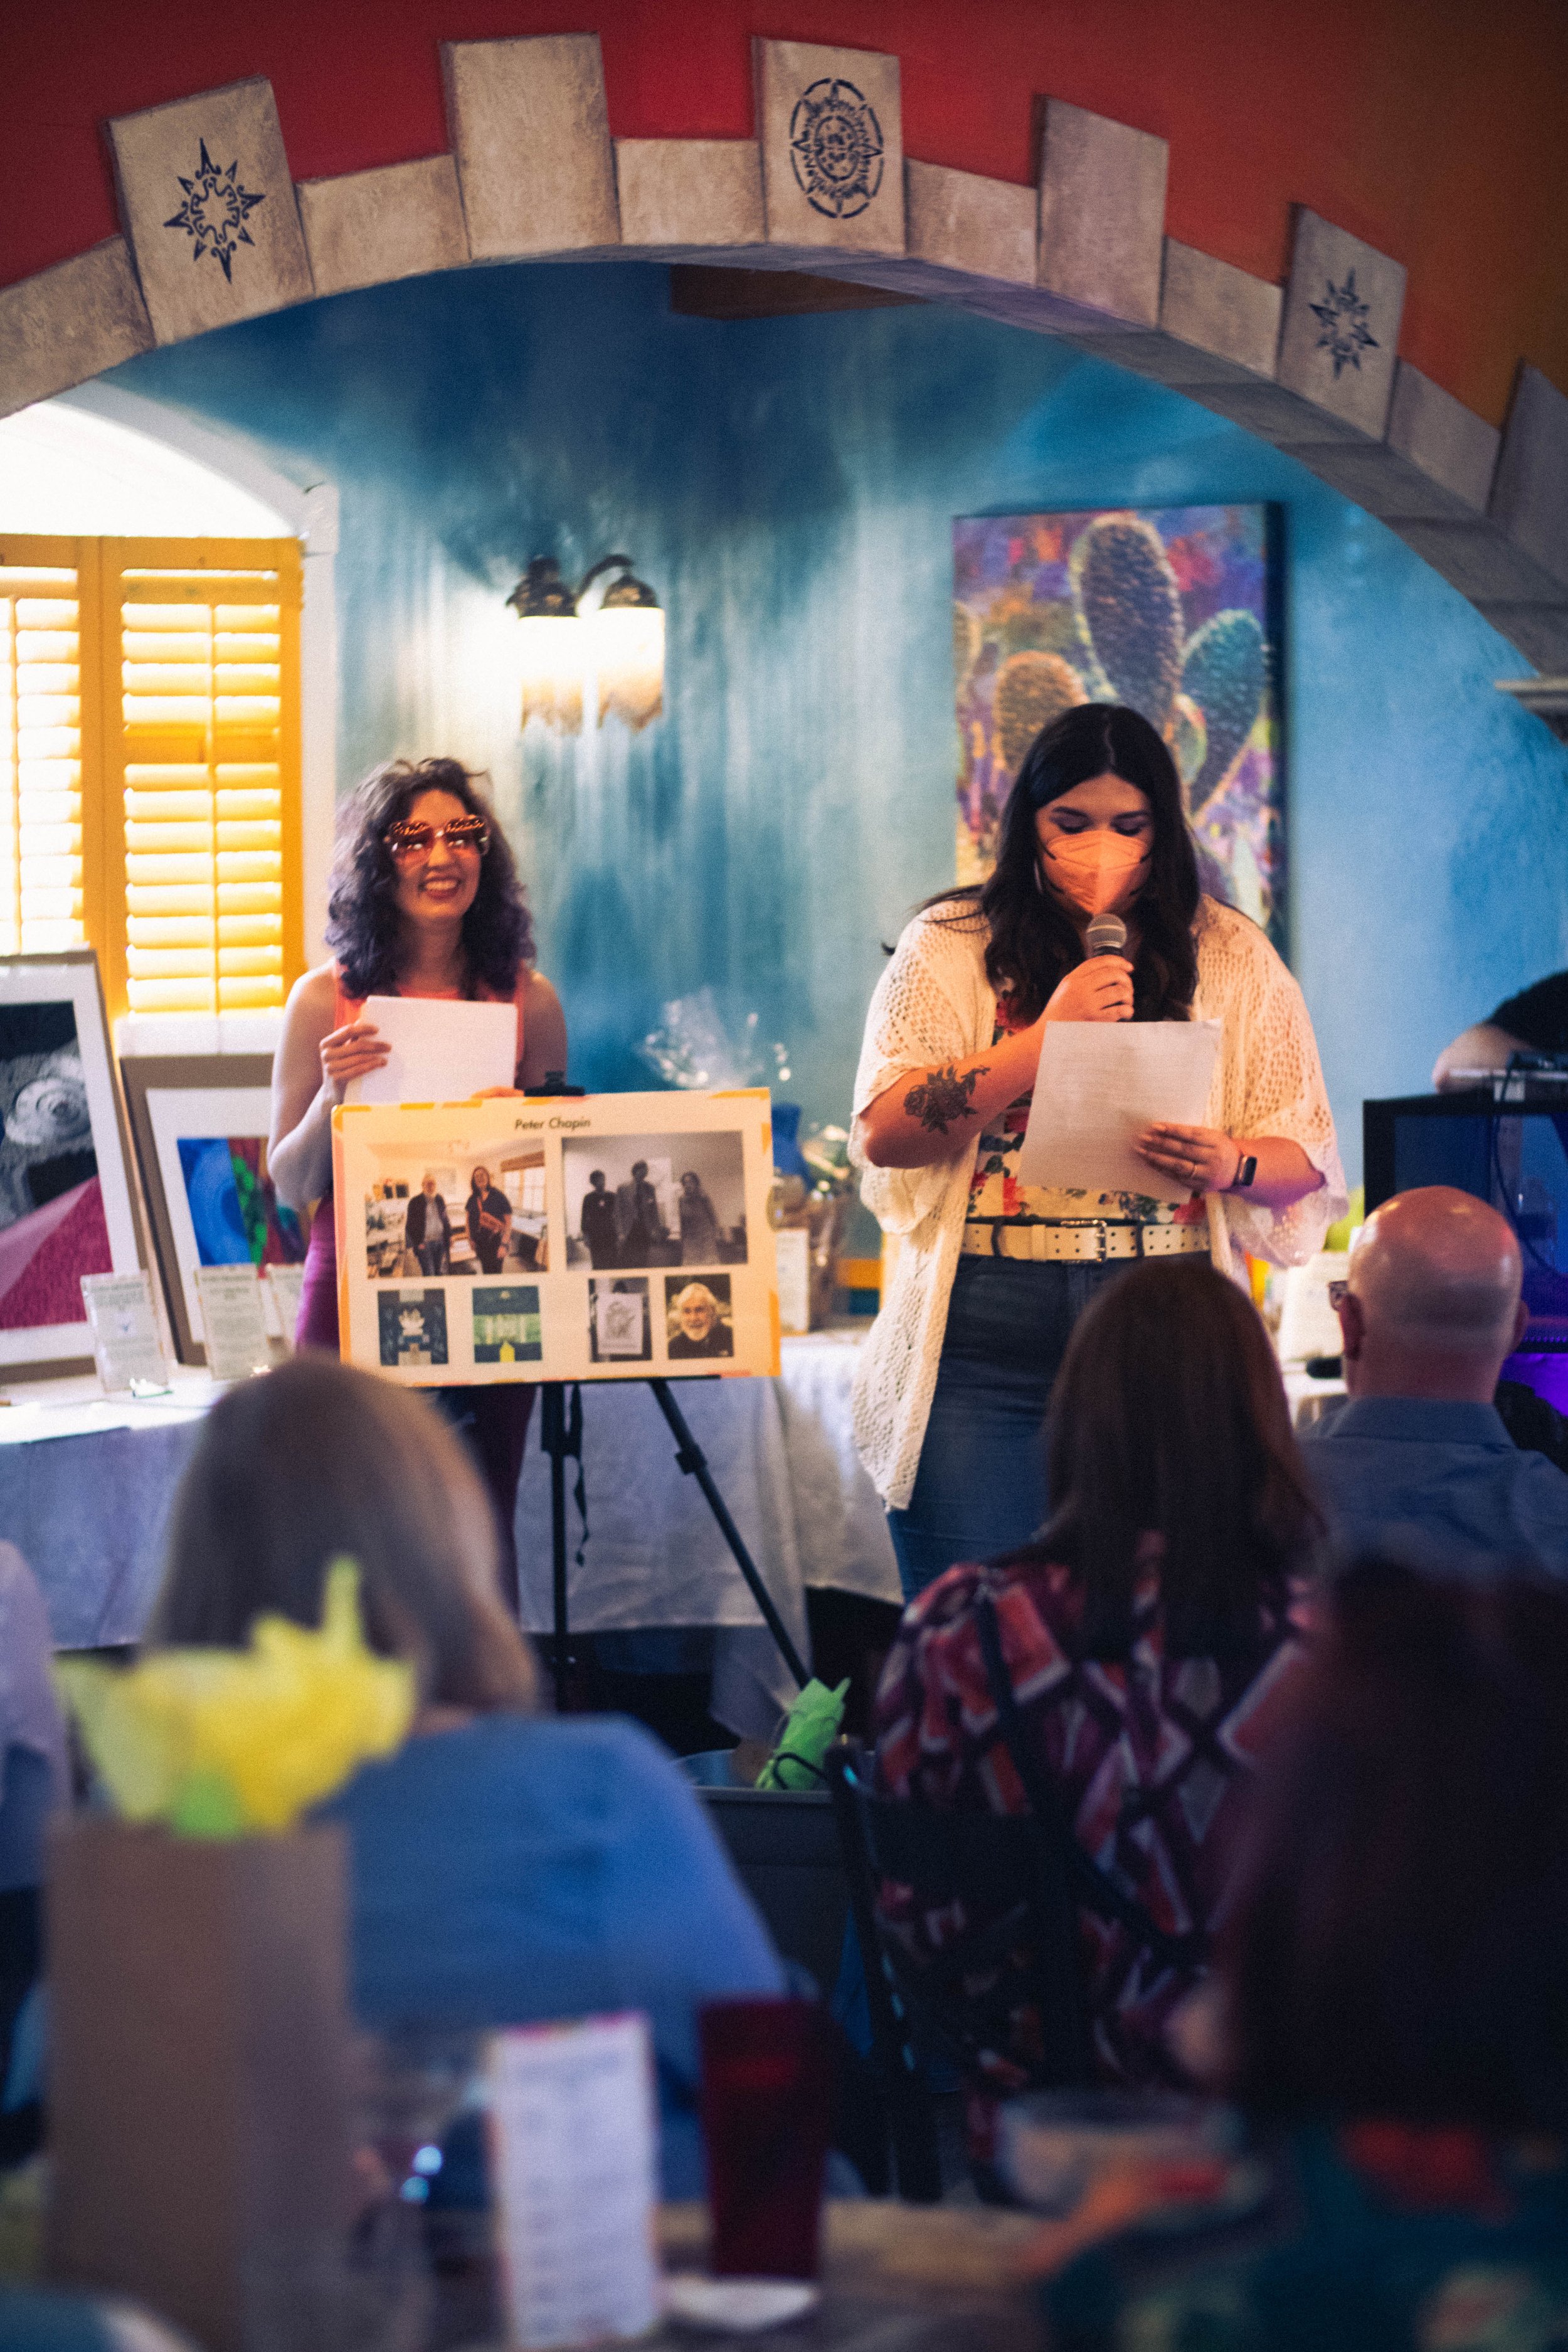  In front of the auction items displayed, Rachel Heberling and Lindsey Knipe are presenting highlights of honorees, with Rachel holding a display of pictures arranged in a collage and Lindsey reading from a paper as she talks. 